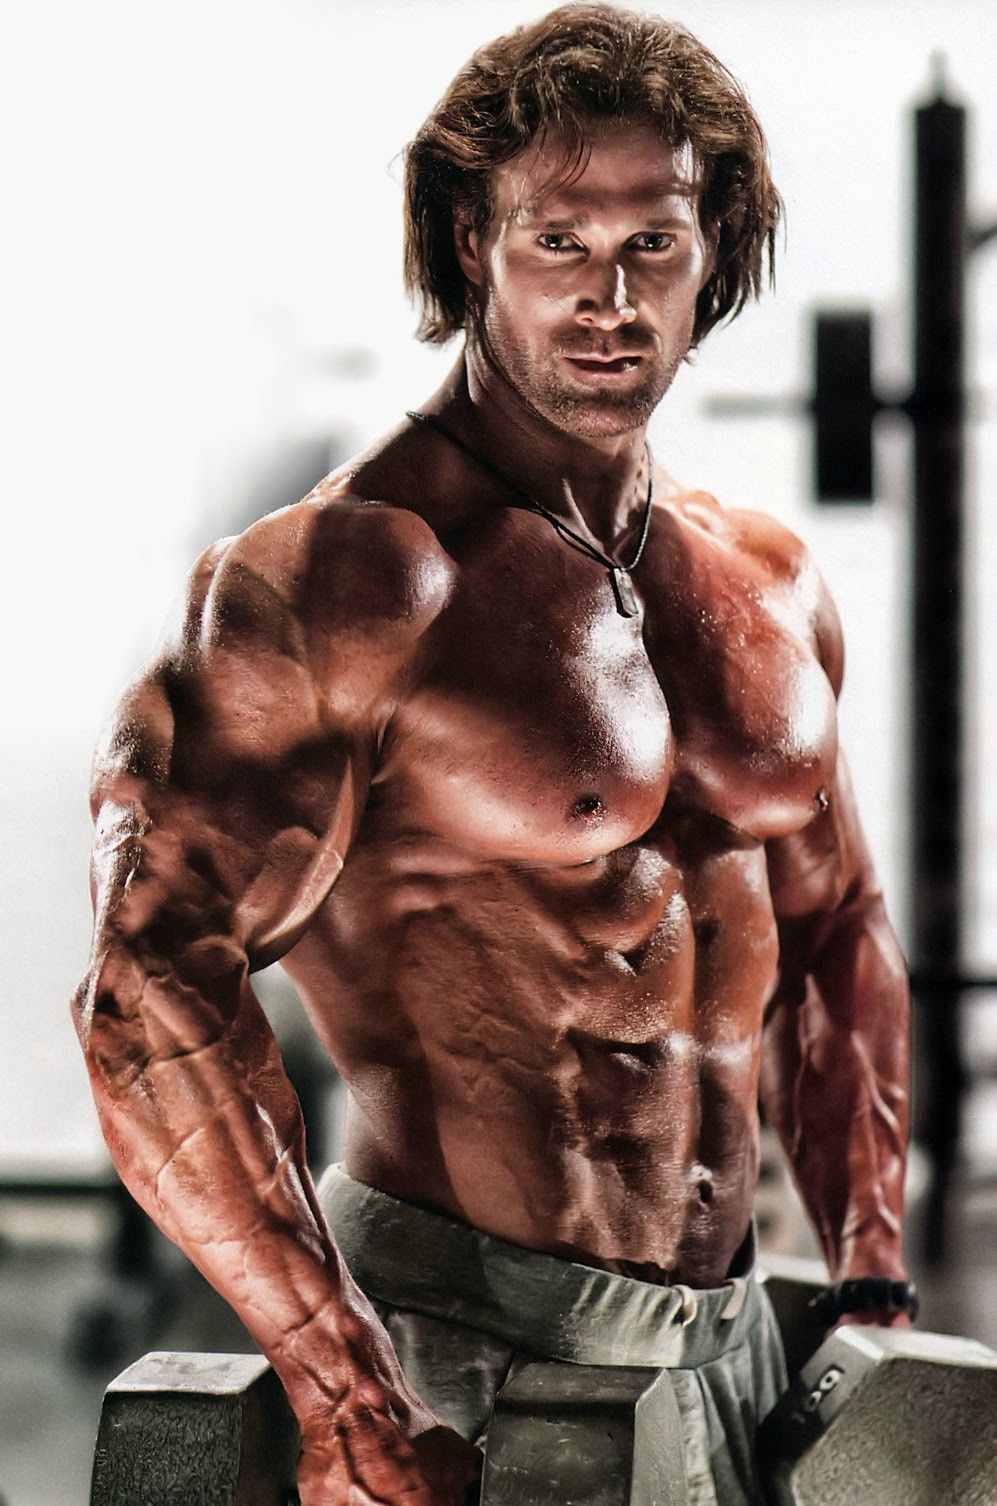 Mike O'hearn. Bodybuilding workouts, Bodybuilding, Bodyweight workout